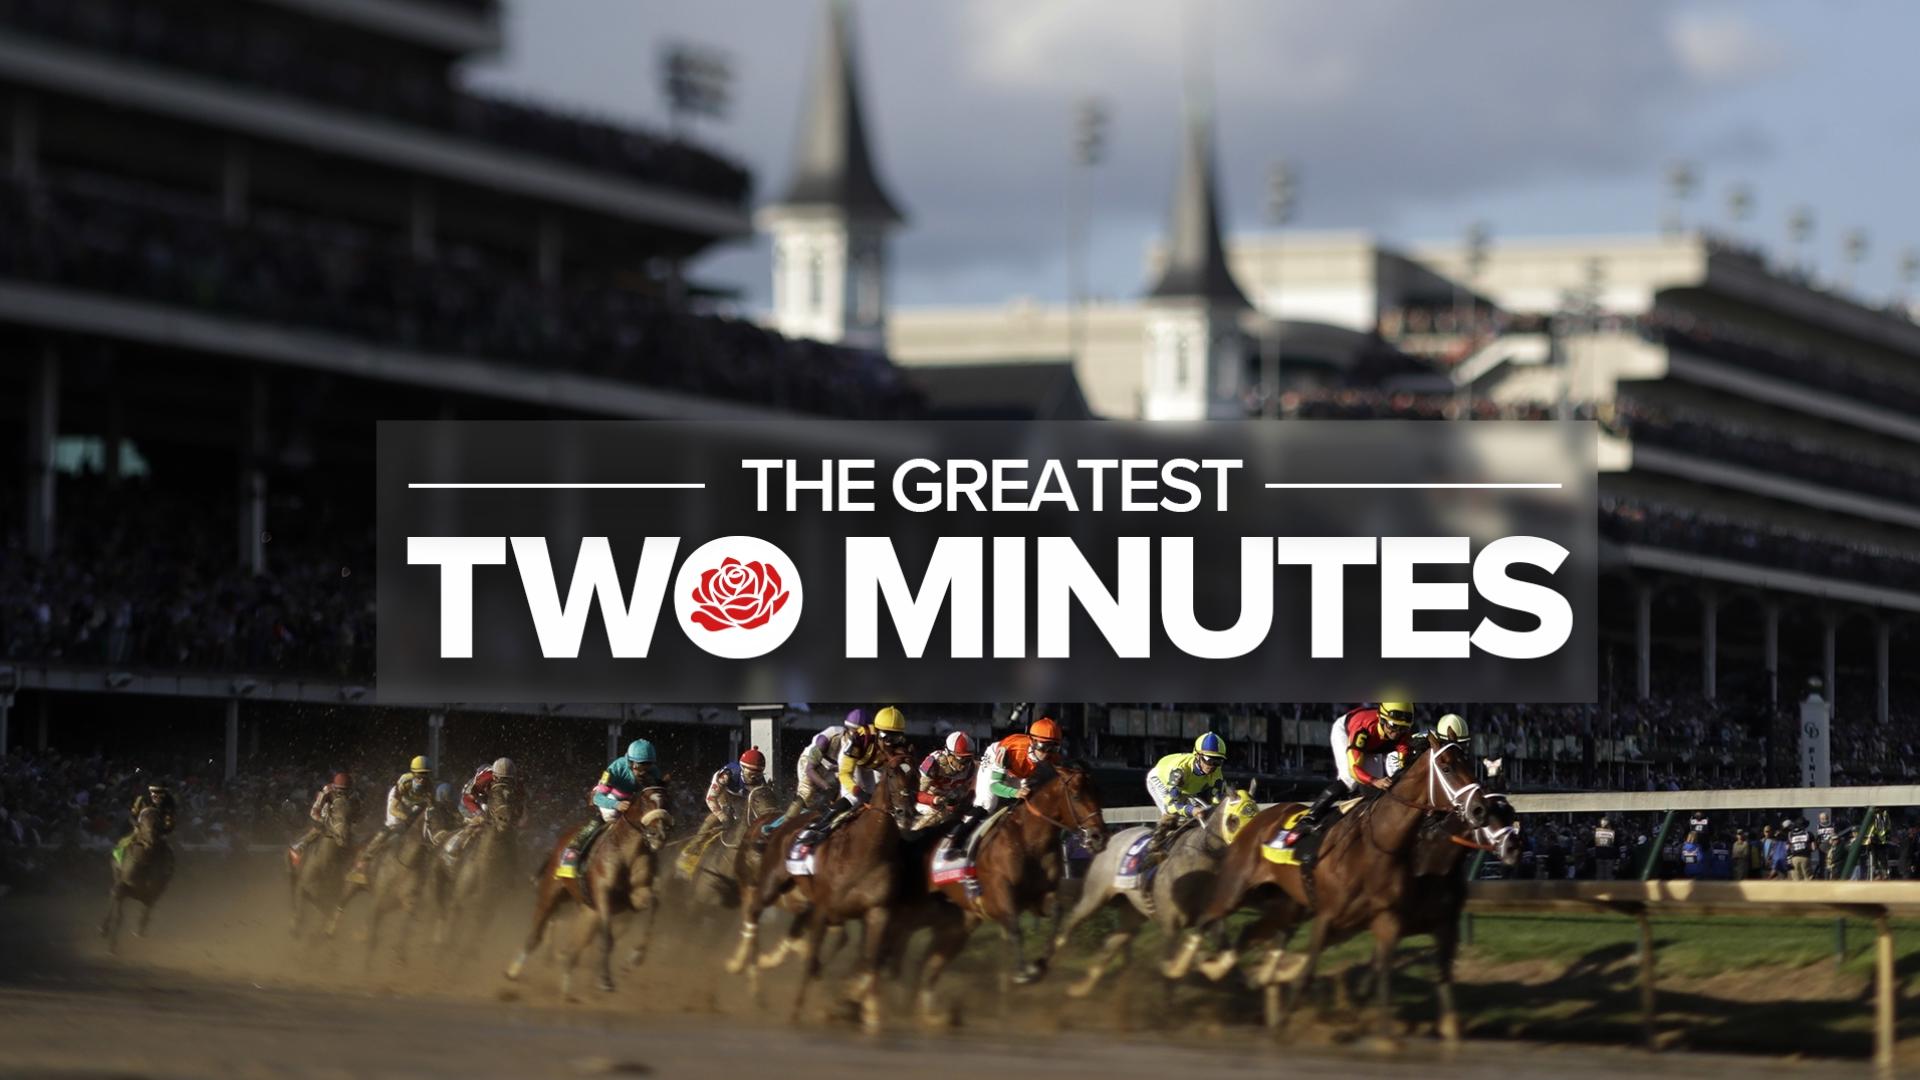 The Kentucky Derby is held annually in Louisville, Kentucky. It's one of the most prestigious horse races in the world.